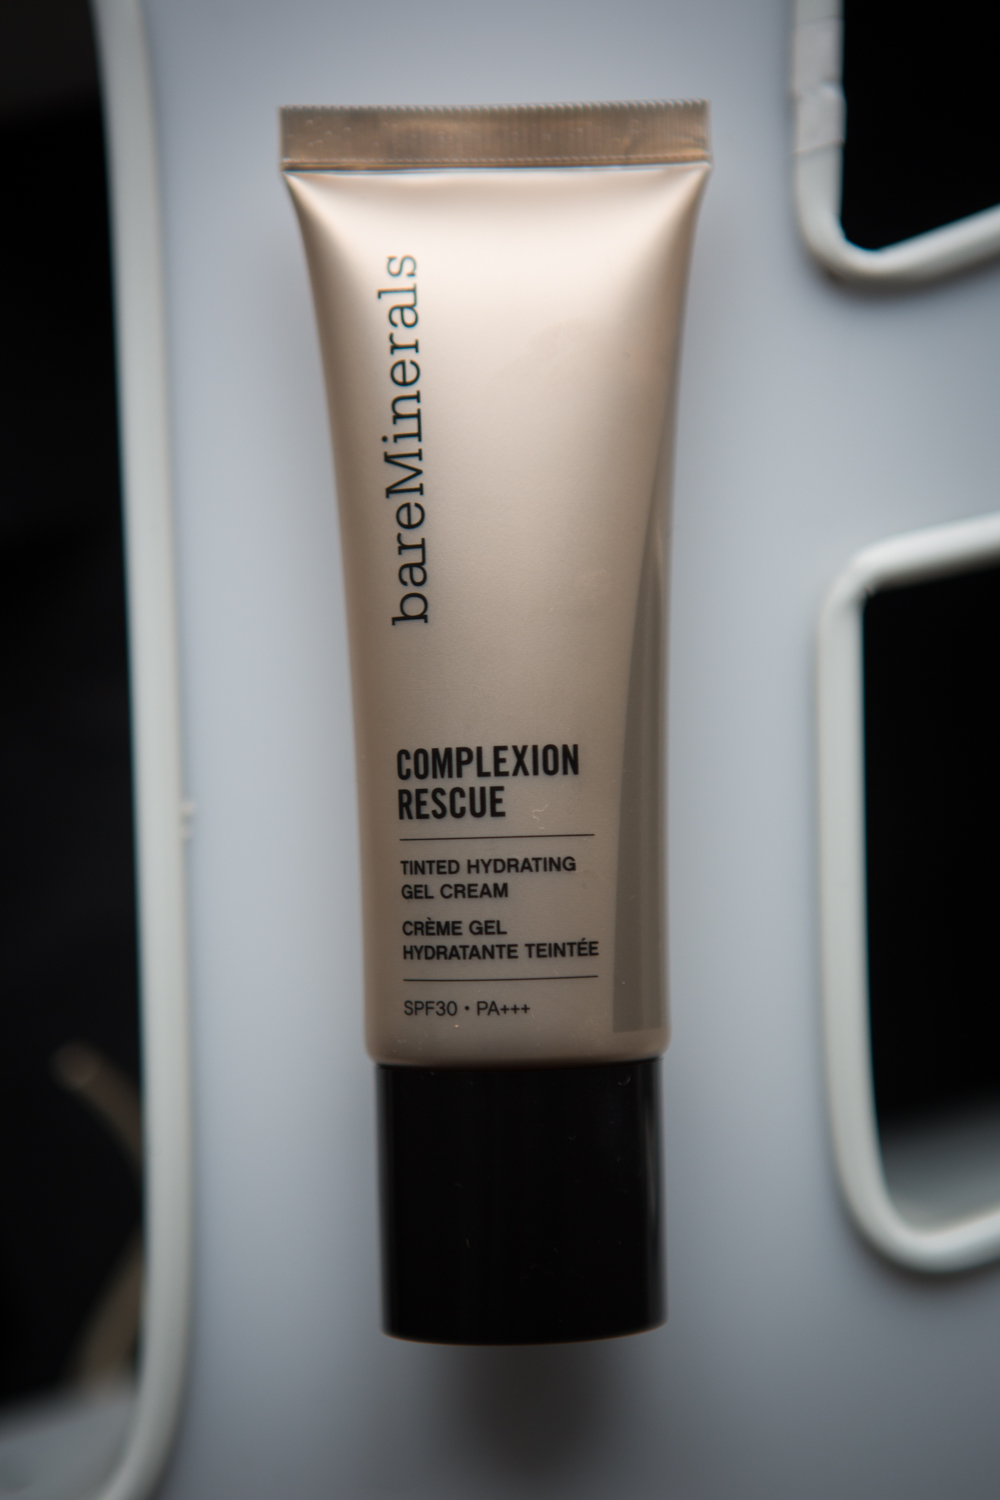 bareMinerals Complexion Rescue Tinted Highdrating Gel Cream - getönte Tagescreme